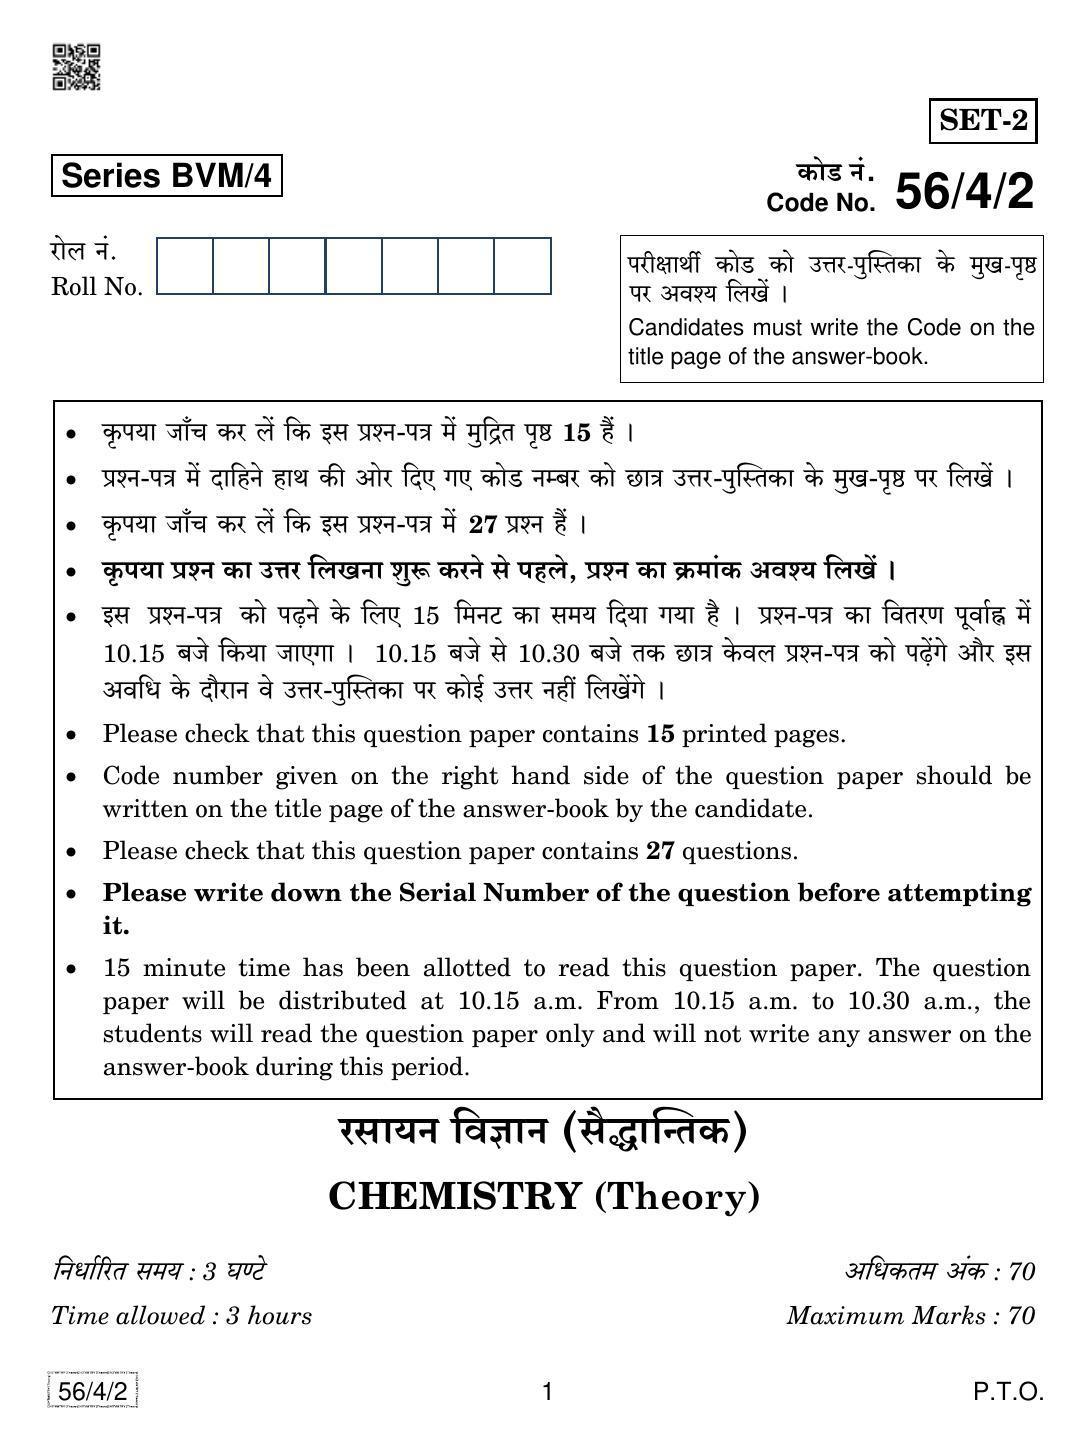 CBSE Class 12 56-4-2 Chemistry 2019 Question Paper - Page 1